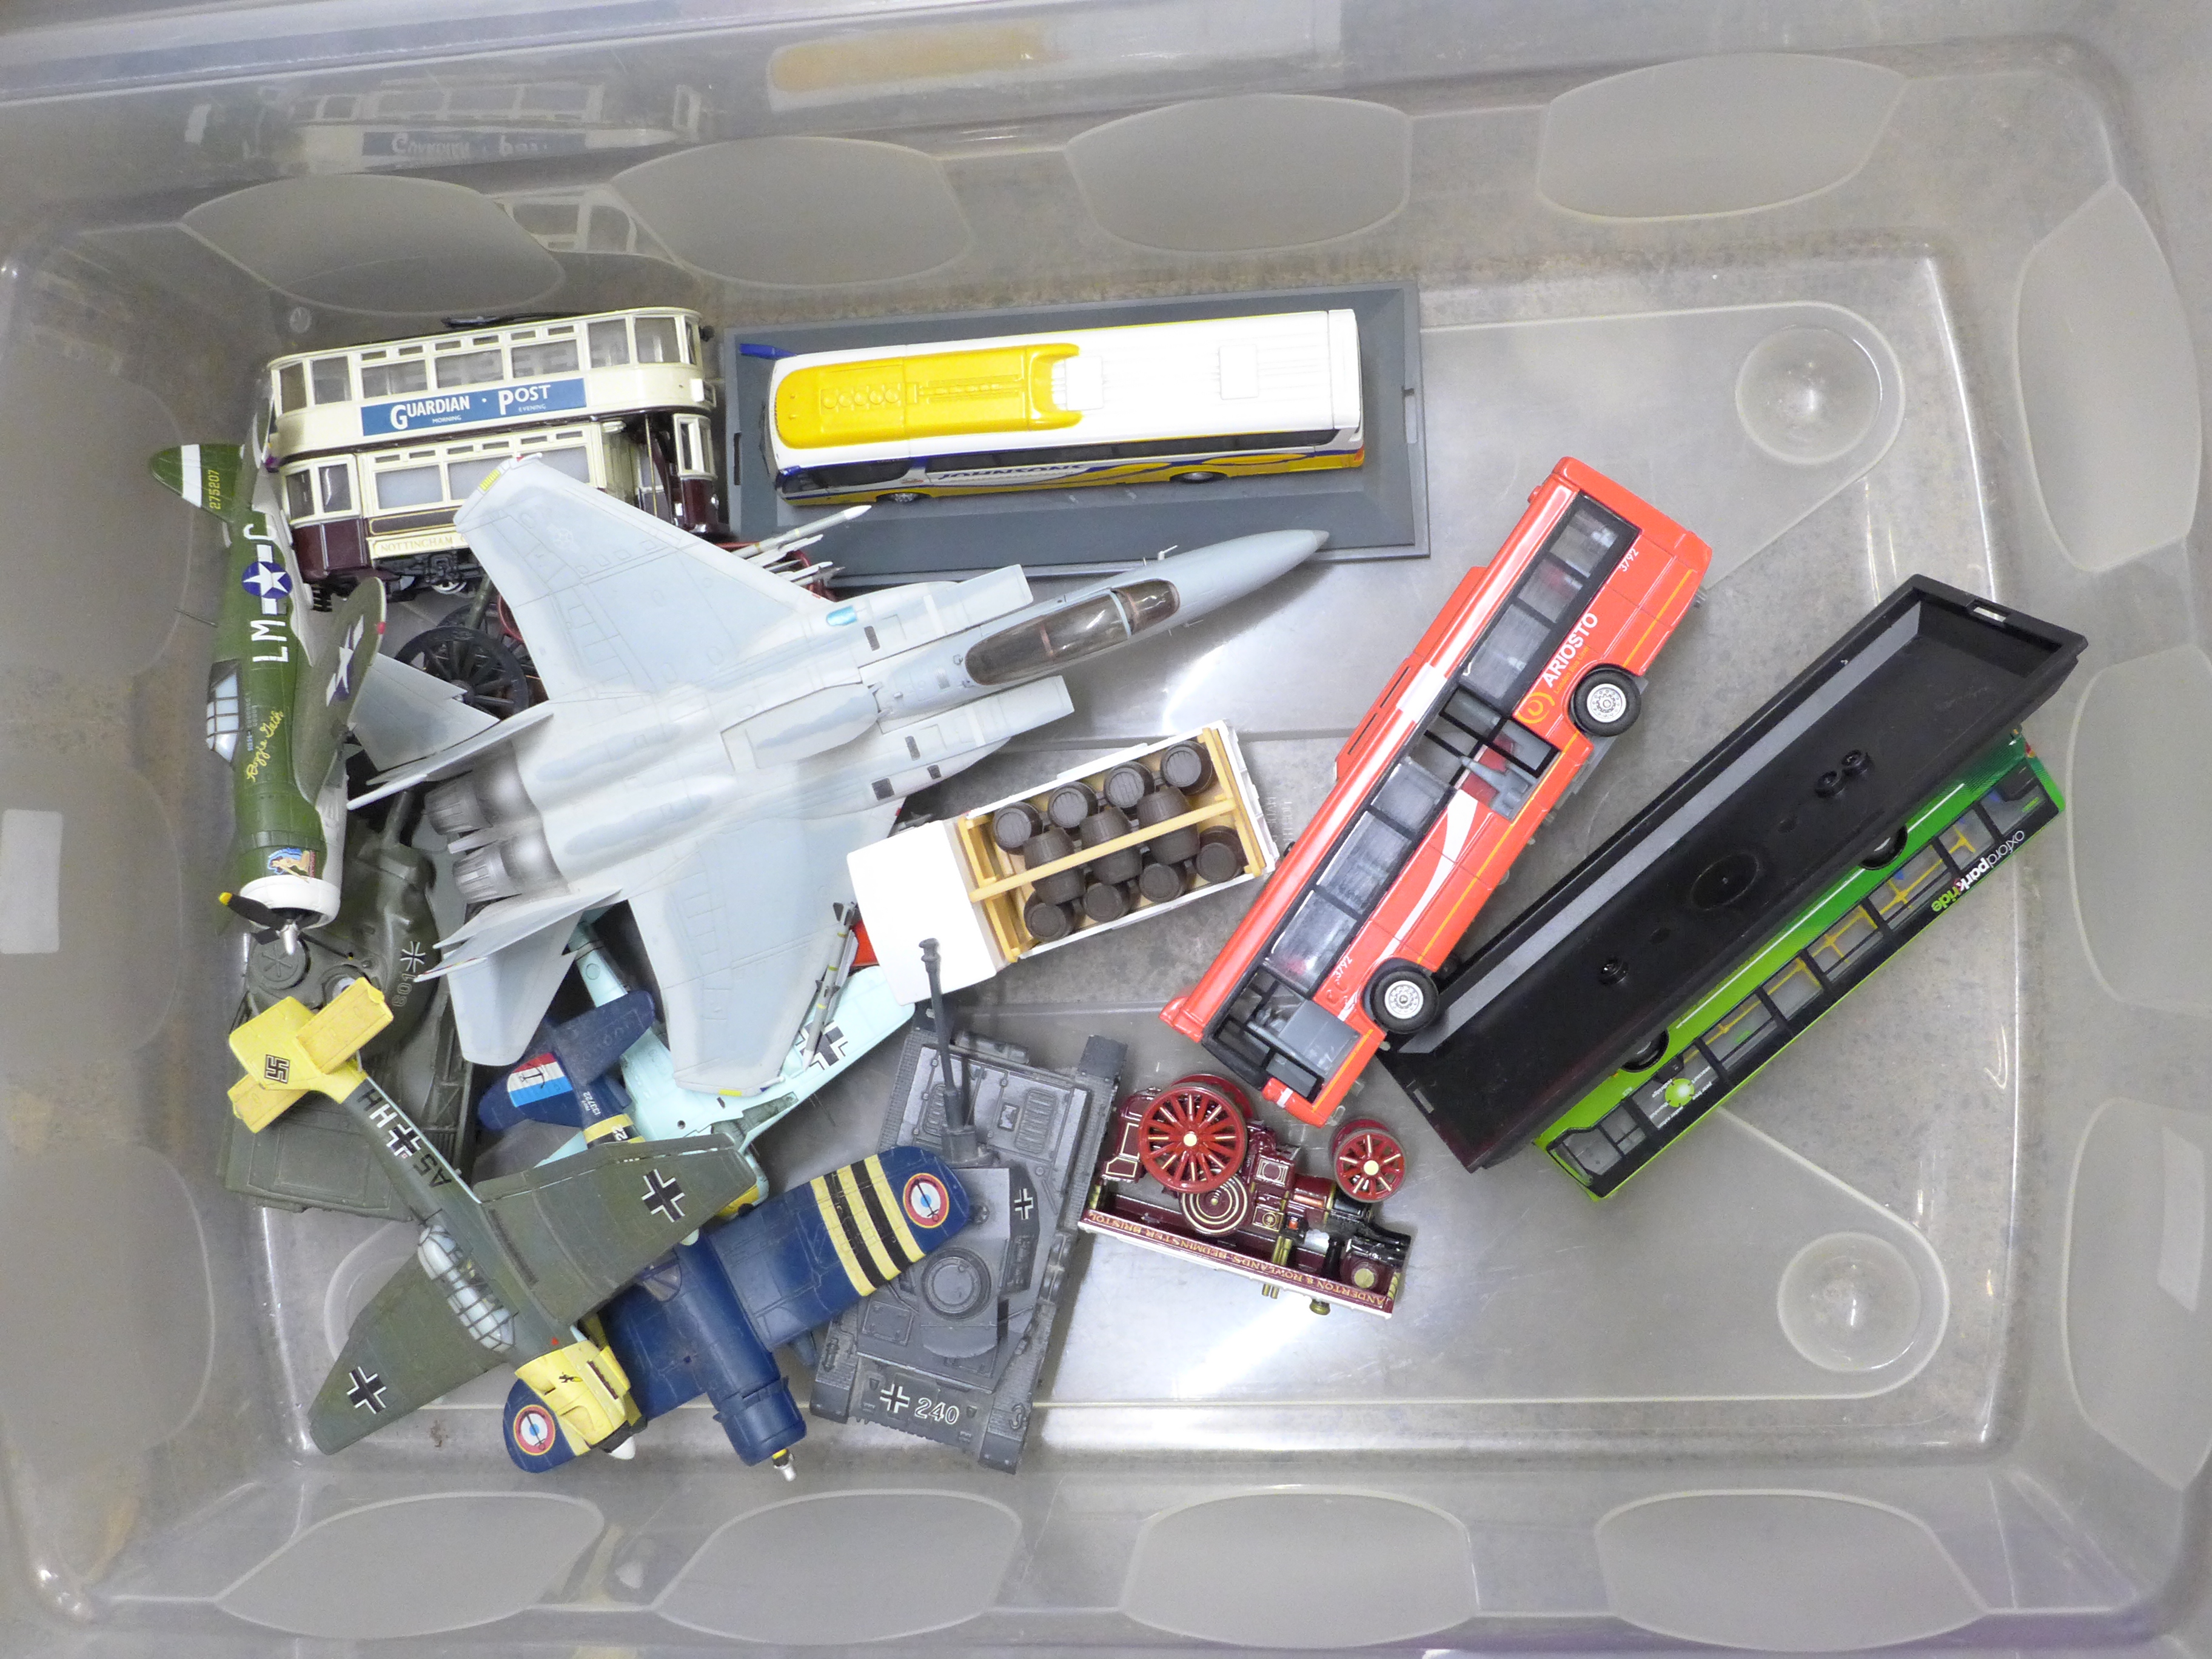 Three boxes of plastic model boat kits and a collection of die-cast model planes and buses ** - Image 2 of 4